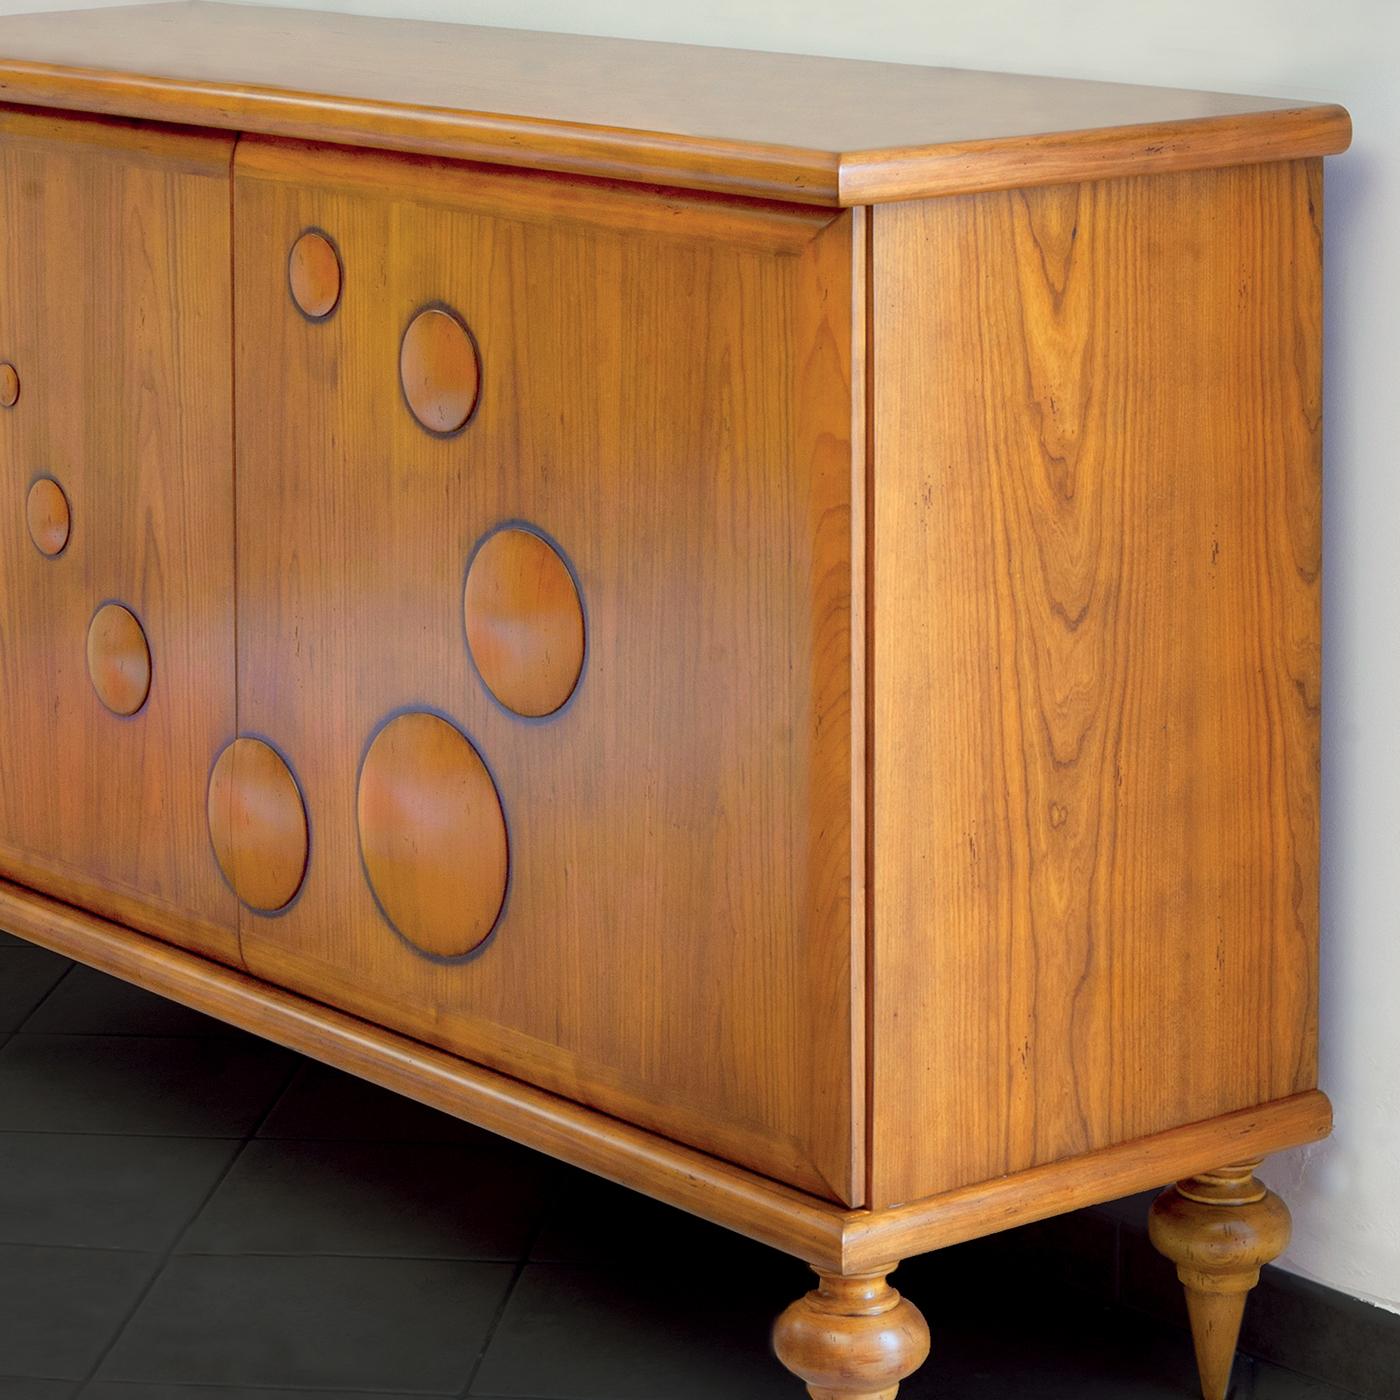 Part of Le Bolle collection marked by carved bubbles turning the solid cherrywood structure into a vibrating and dynamic design, this handsome sideboard will be a statement piece in a rustic-chic interior decor. Raised on four uniquely shaped legs,